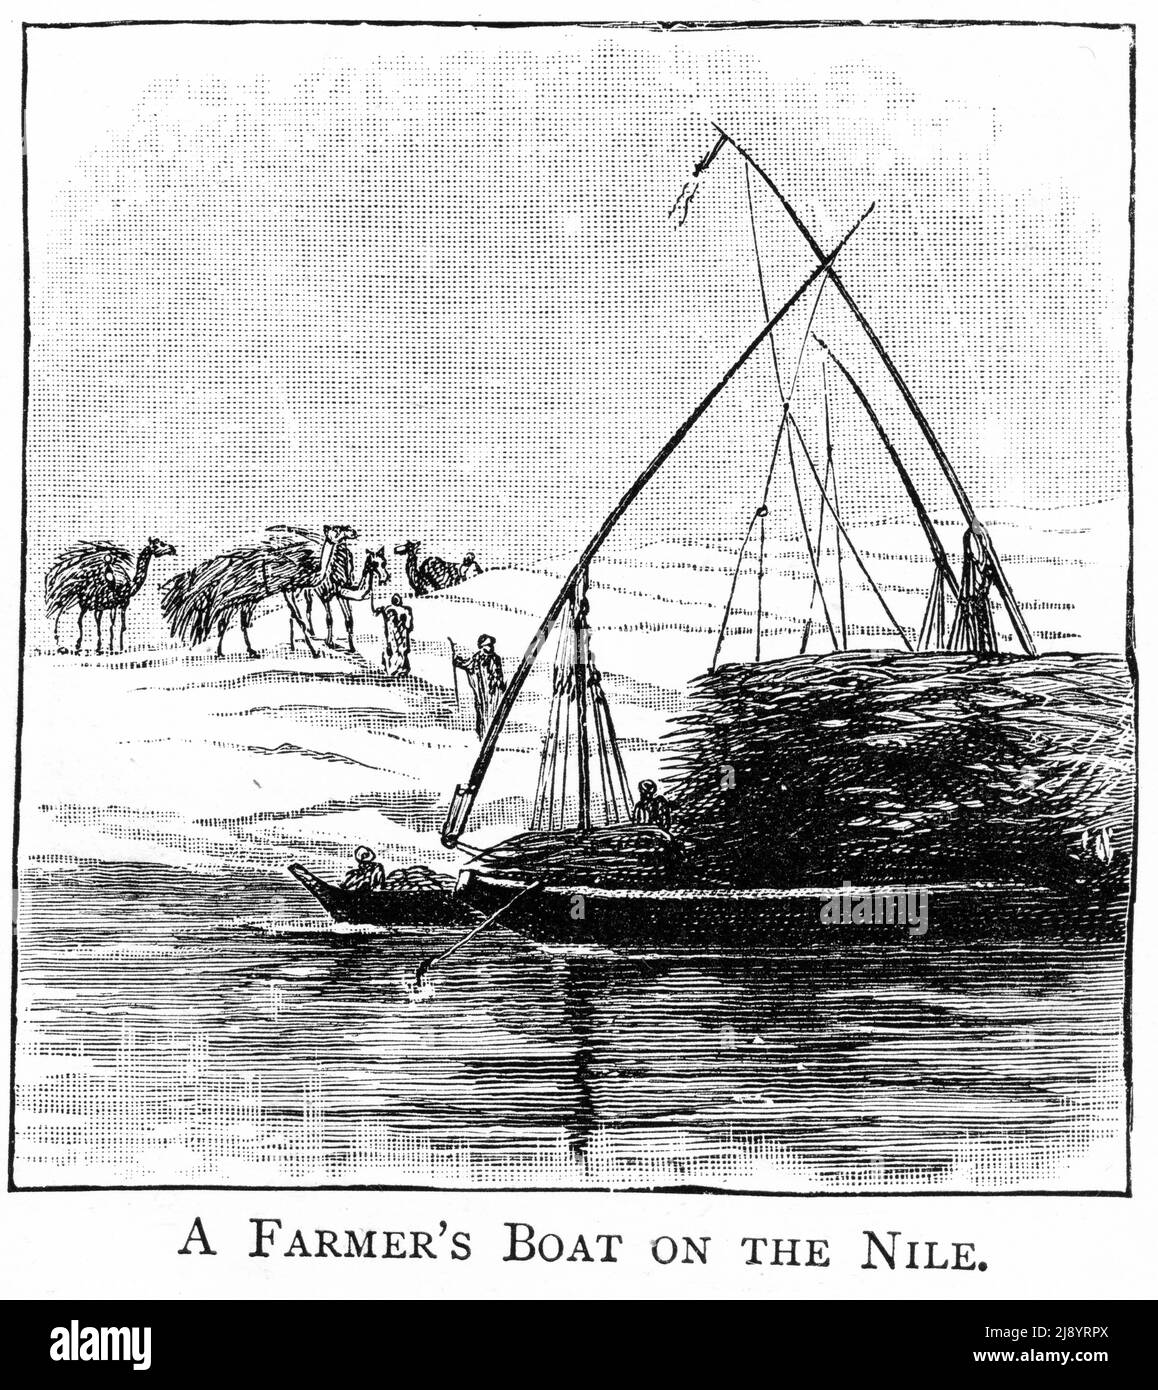 Engraving of a farmer's boat on the Nile River in Egypt, from a publication circa 1900 Stock Photo